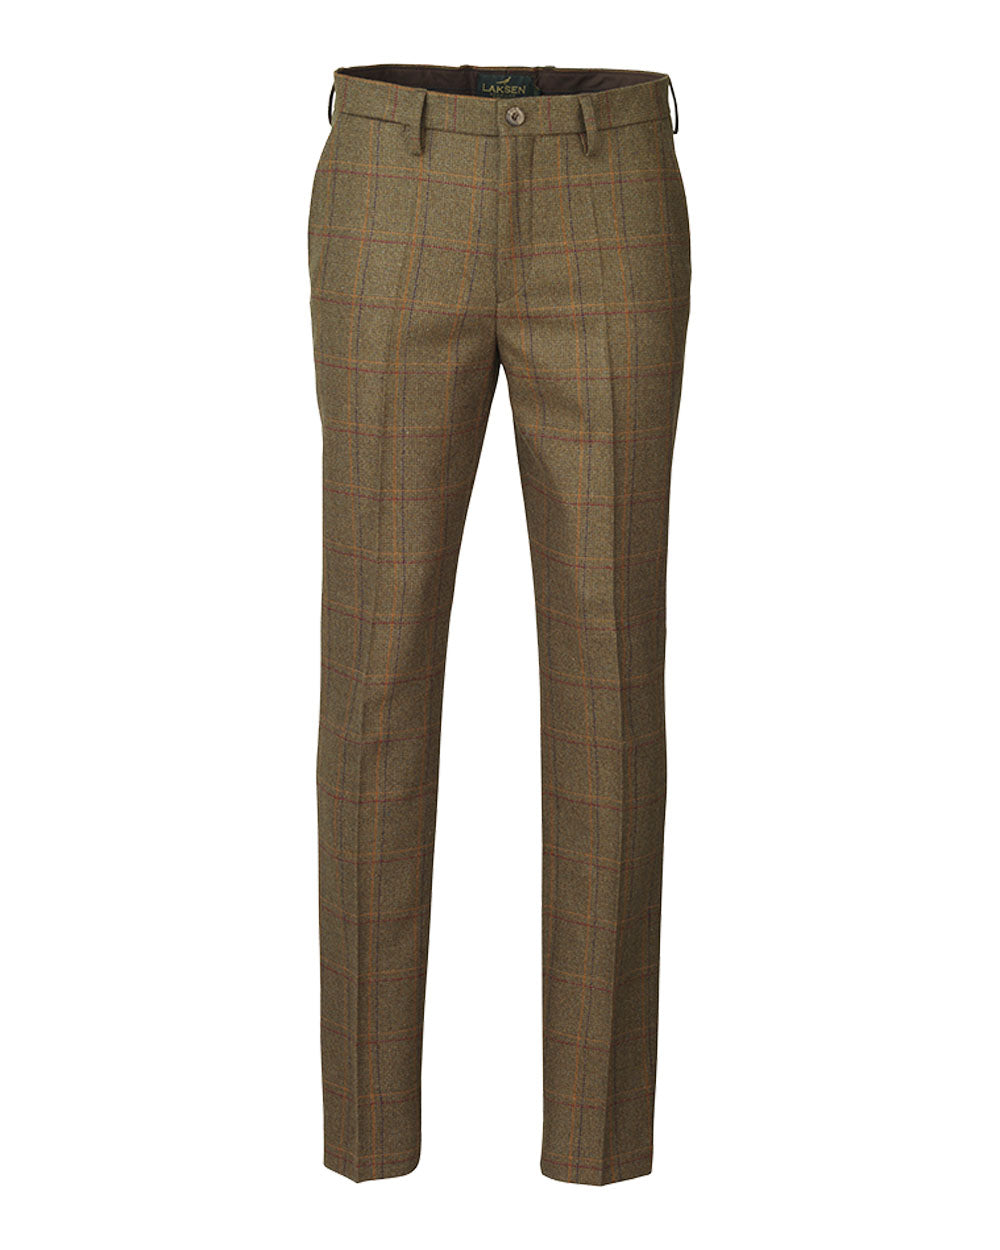 Laksen Woolston Tweed Trousers on White Background